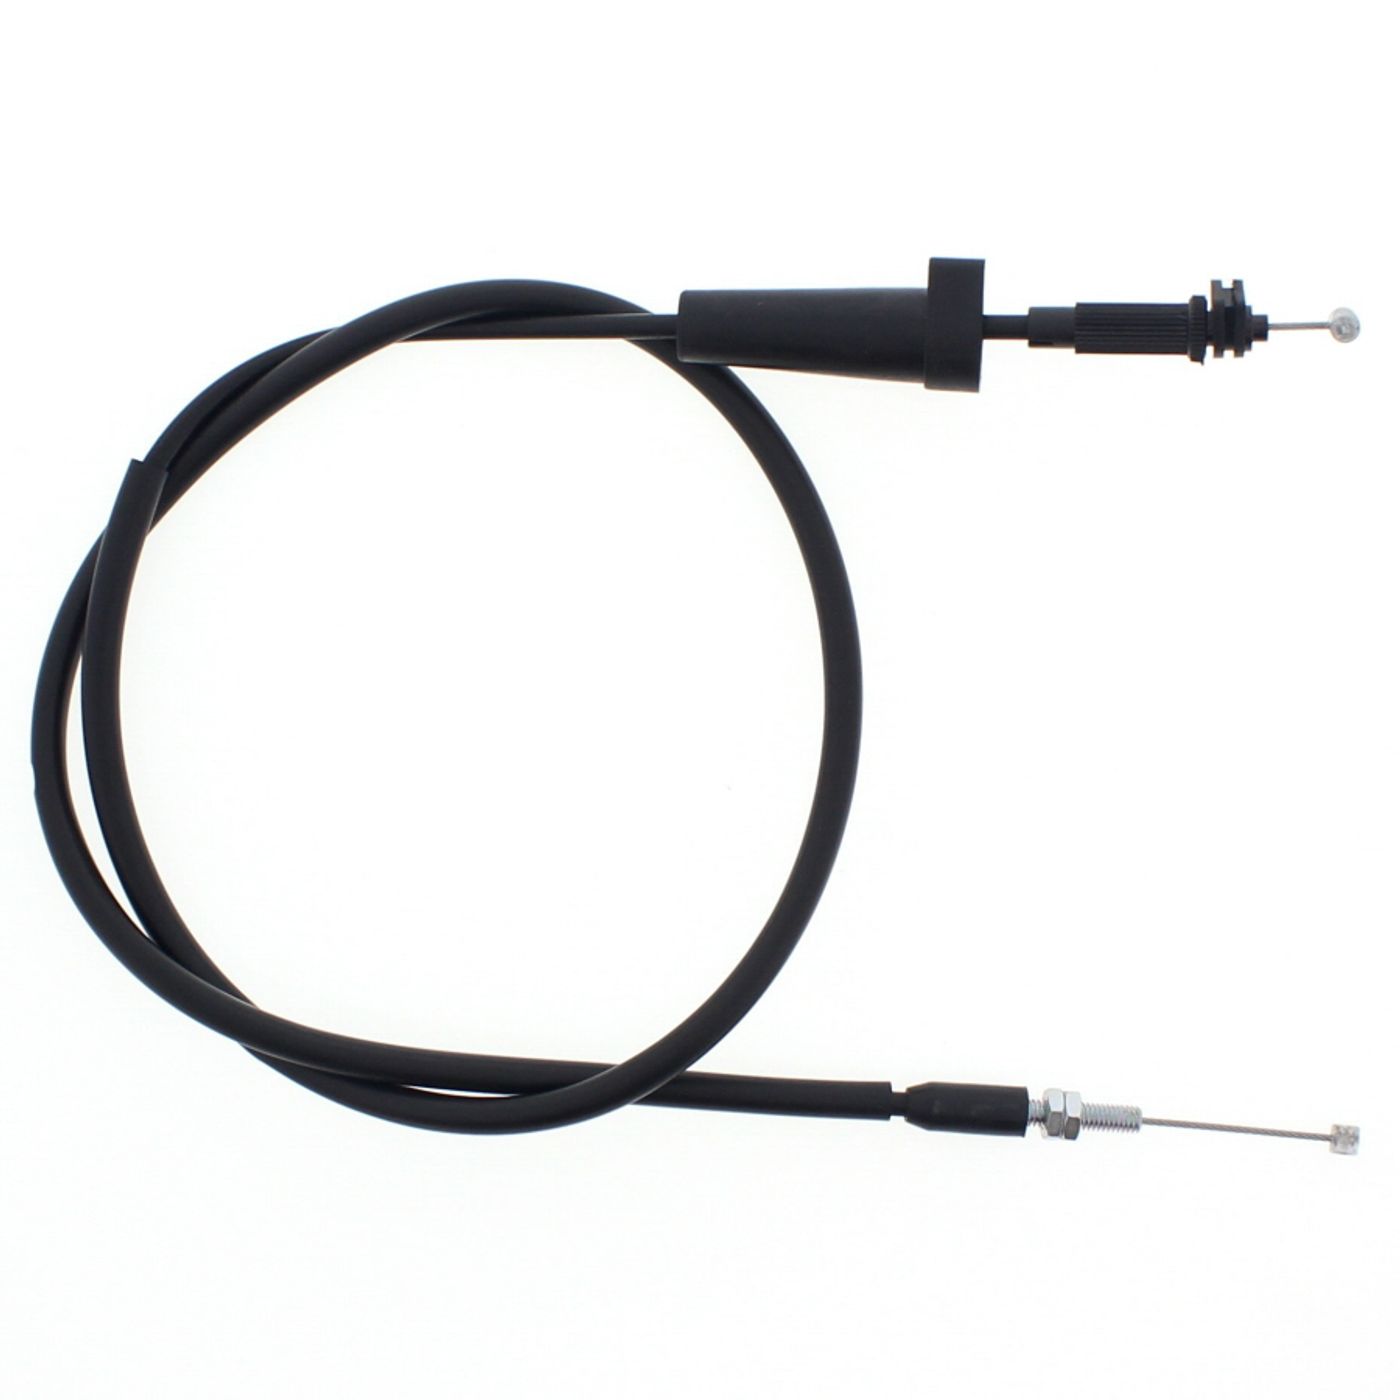 Wrp Throttle Cables - WRP451092 image